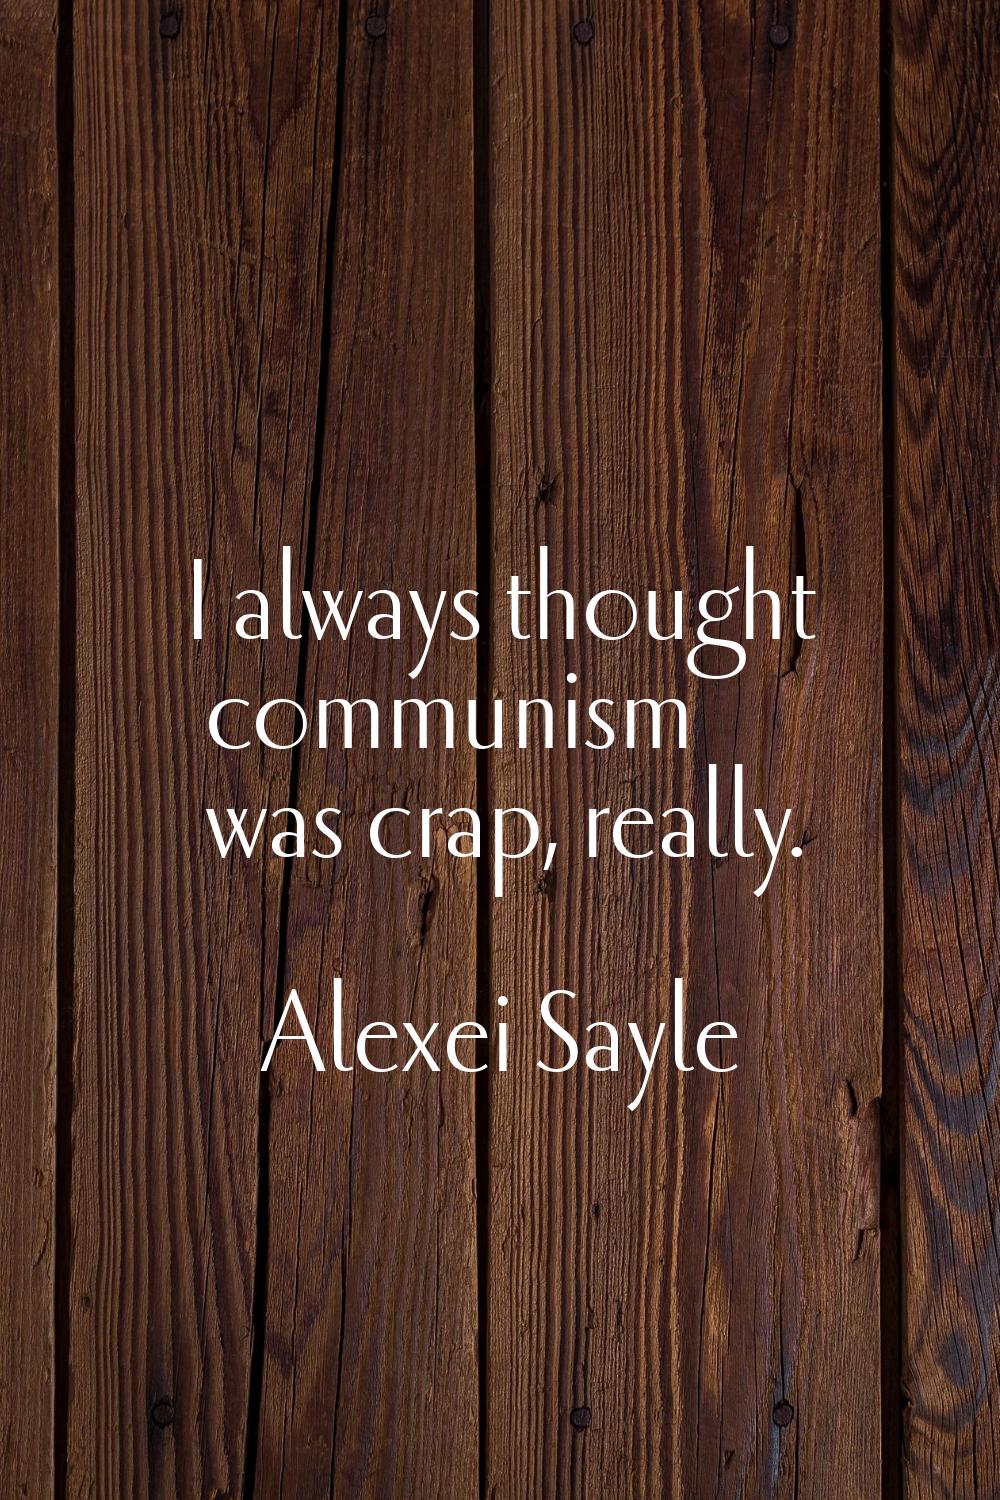 I always thought communism was crap, really.